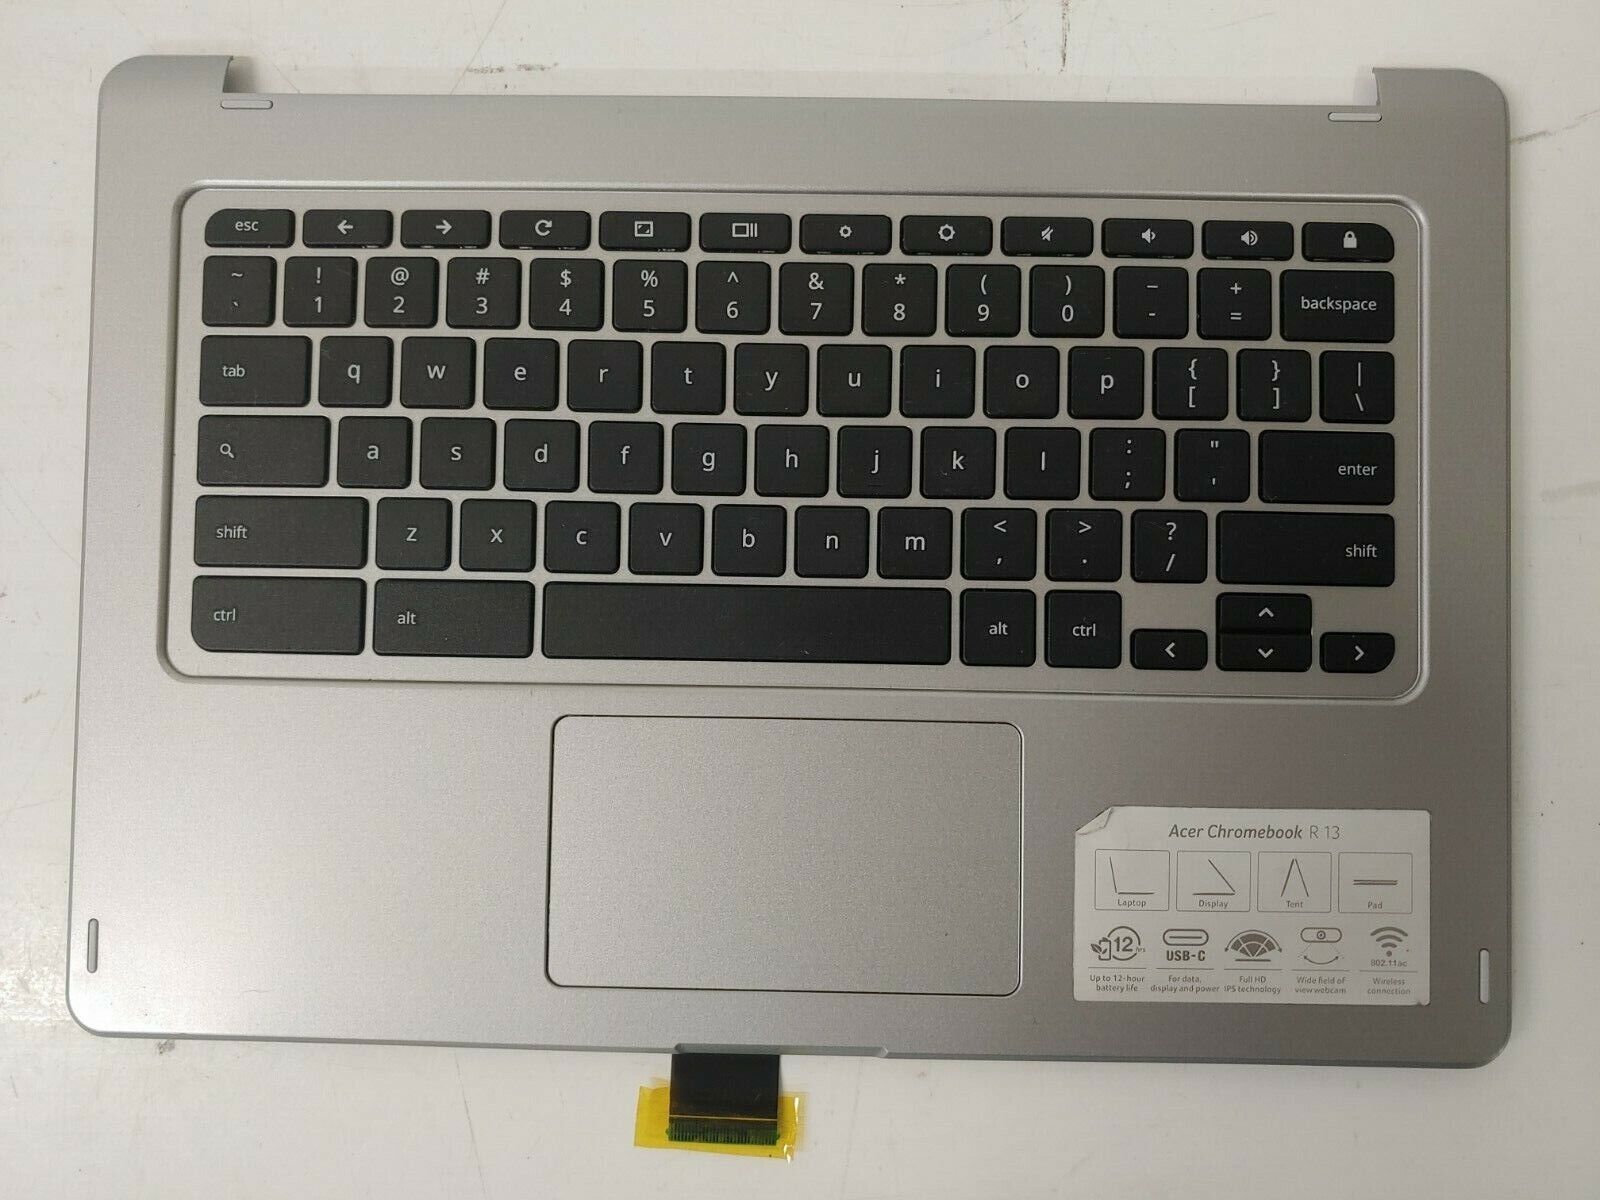 Used Acer Chromebook R13 Keyboard/trackpad replacement